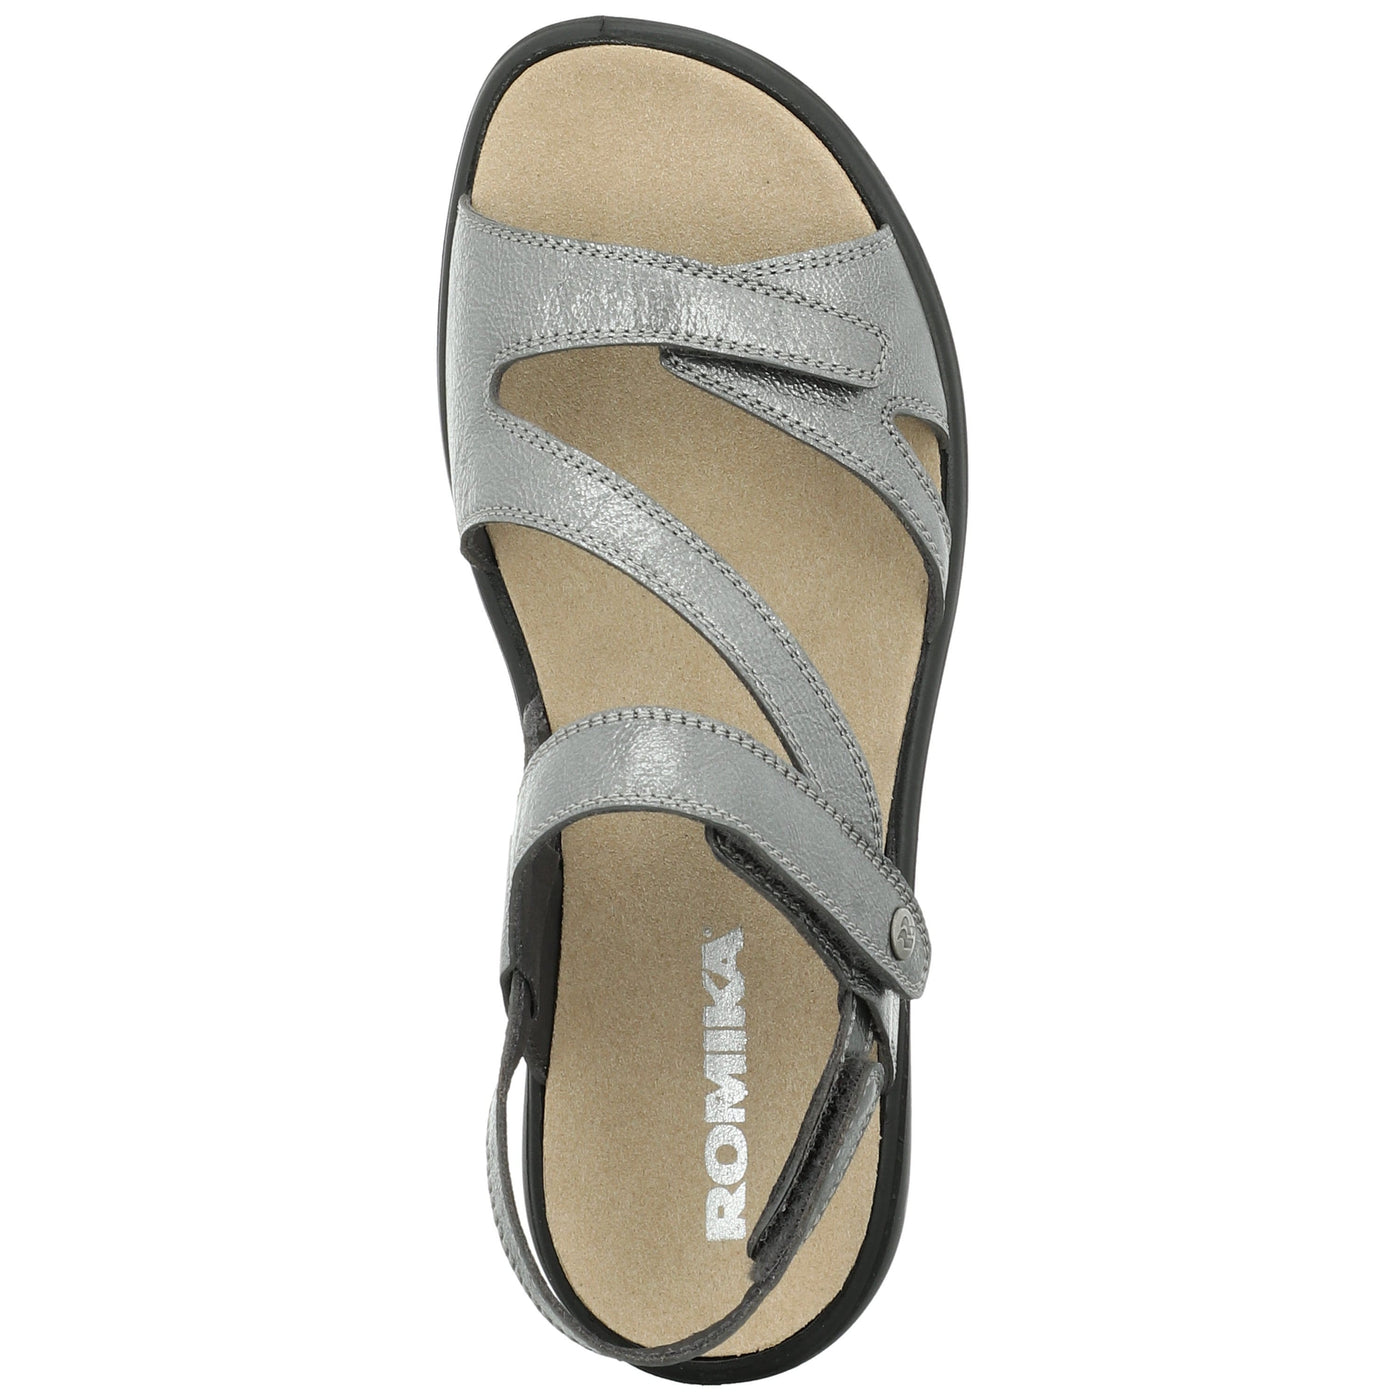 Romika Ibiza 105 | Chaussures confortables - Sandales dame